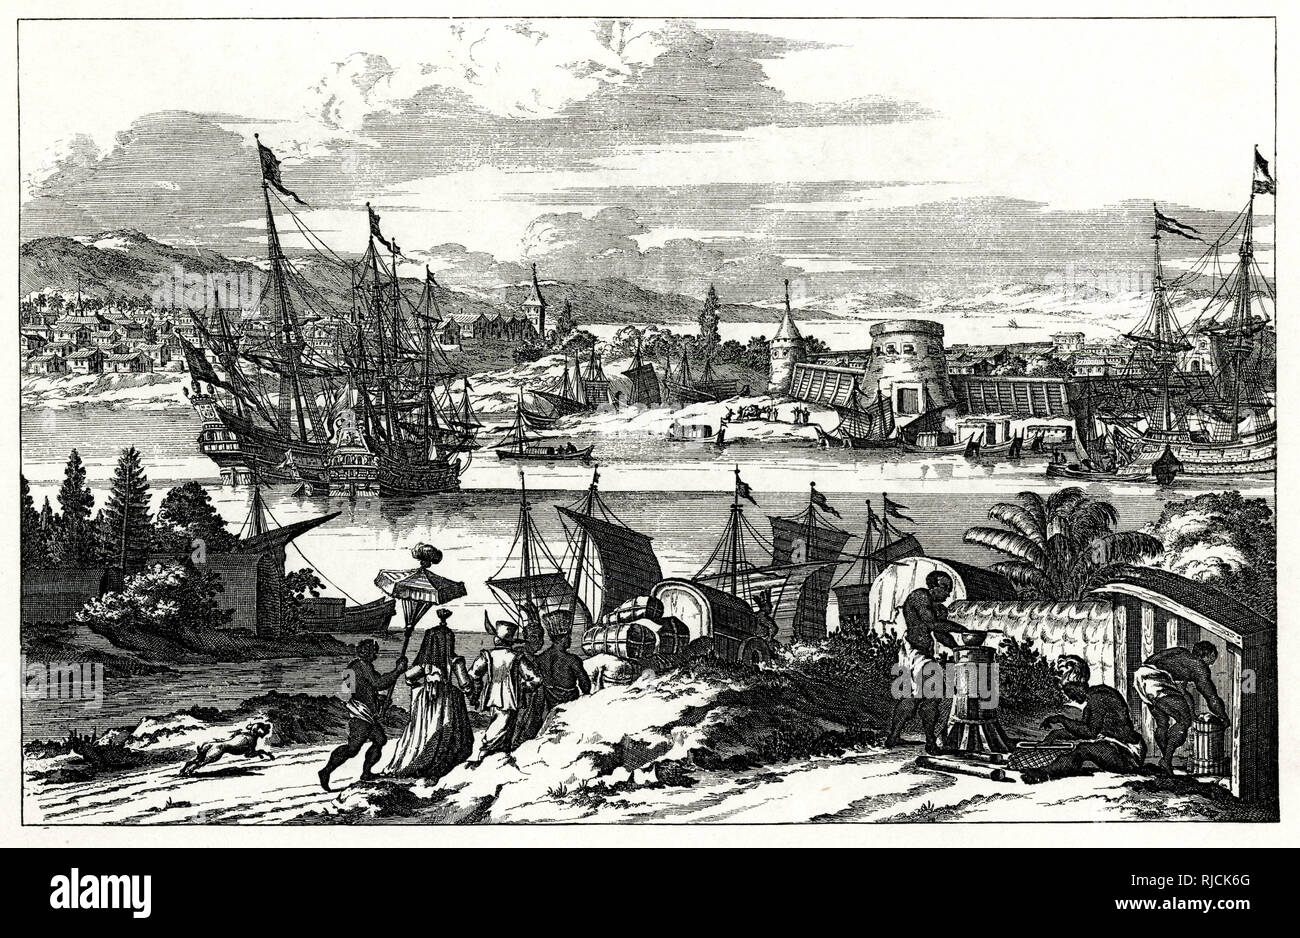 The Spanish settlement of what would later be the city of St. Augustine in Florida. A caravan moves down the road towards a harbour in the distance, busy with ships. Three men work in the foreground. Stock Photo